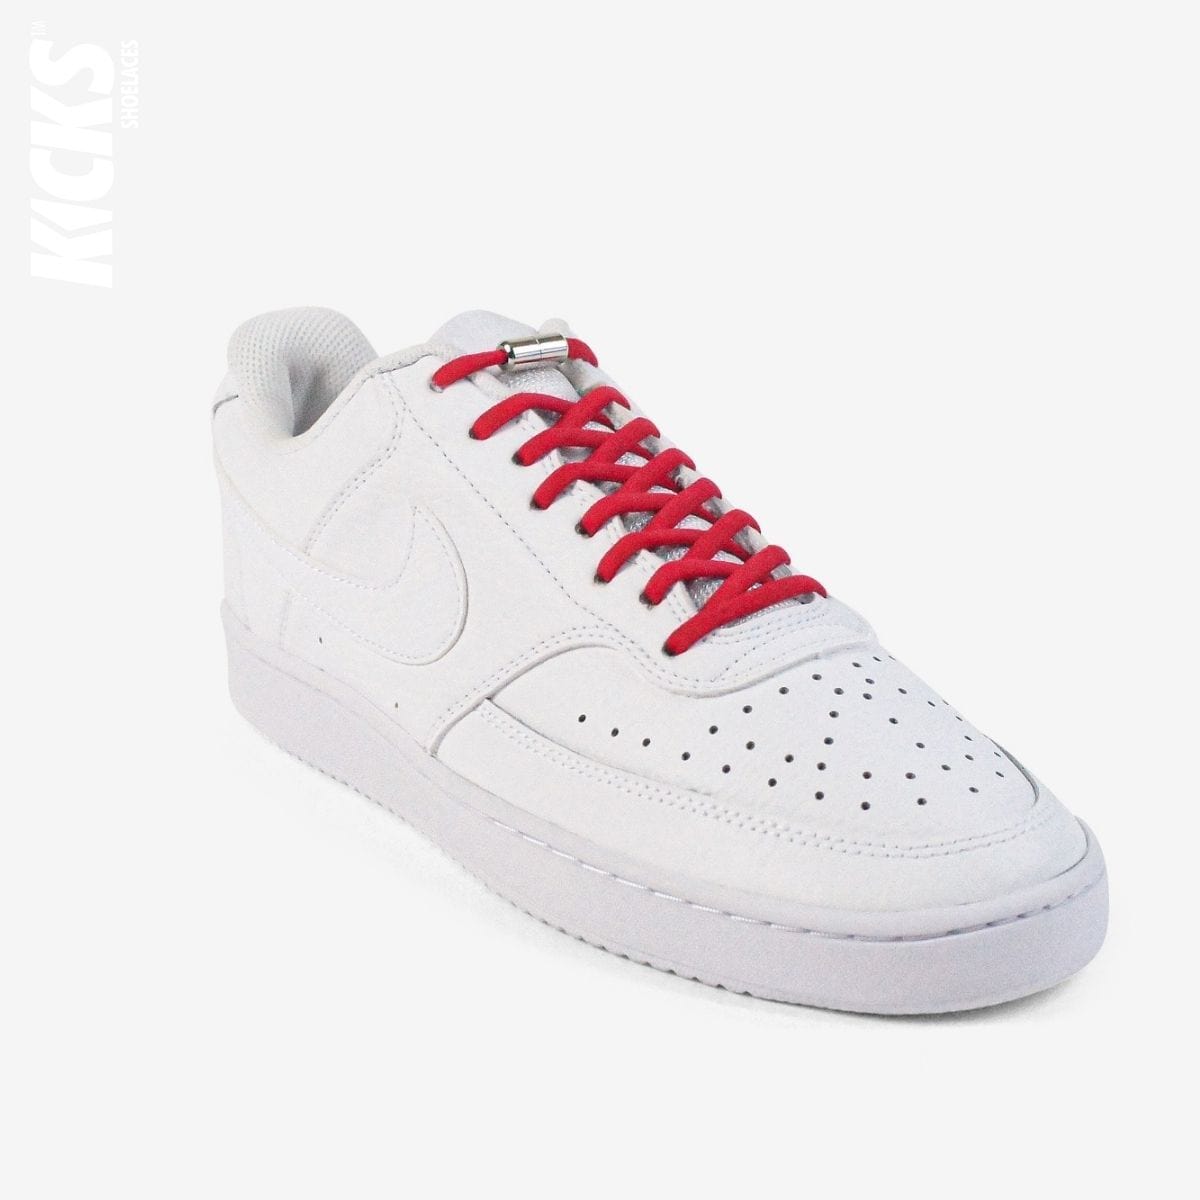 round-no-tie-shoelaces-with-red-laces-on-nike-white-sneakers-by-kicks-shoelaces